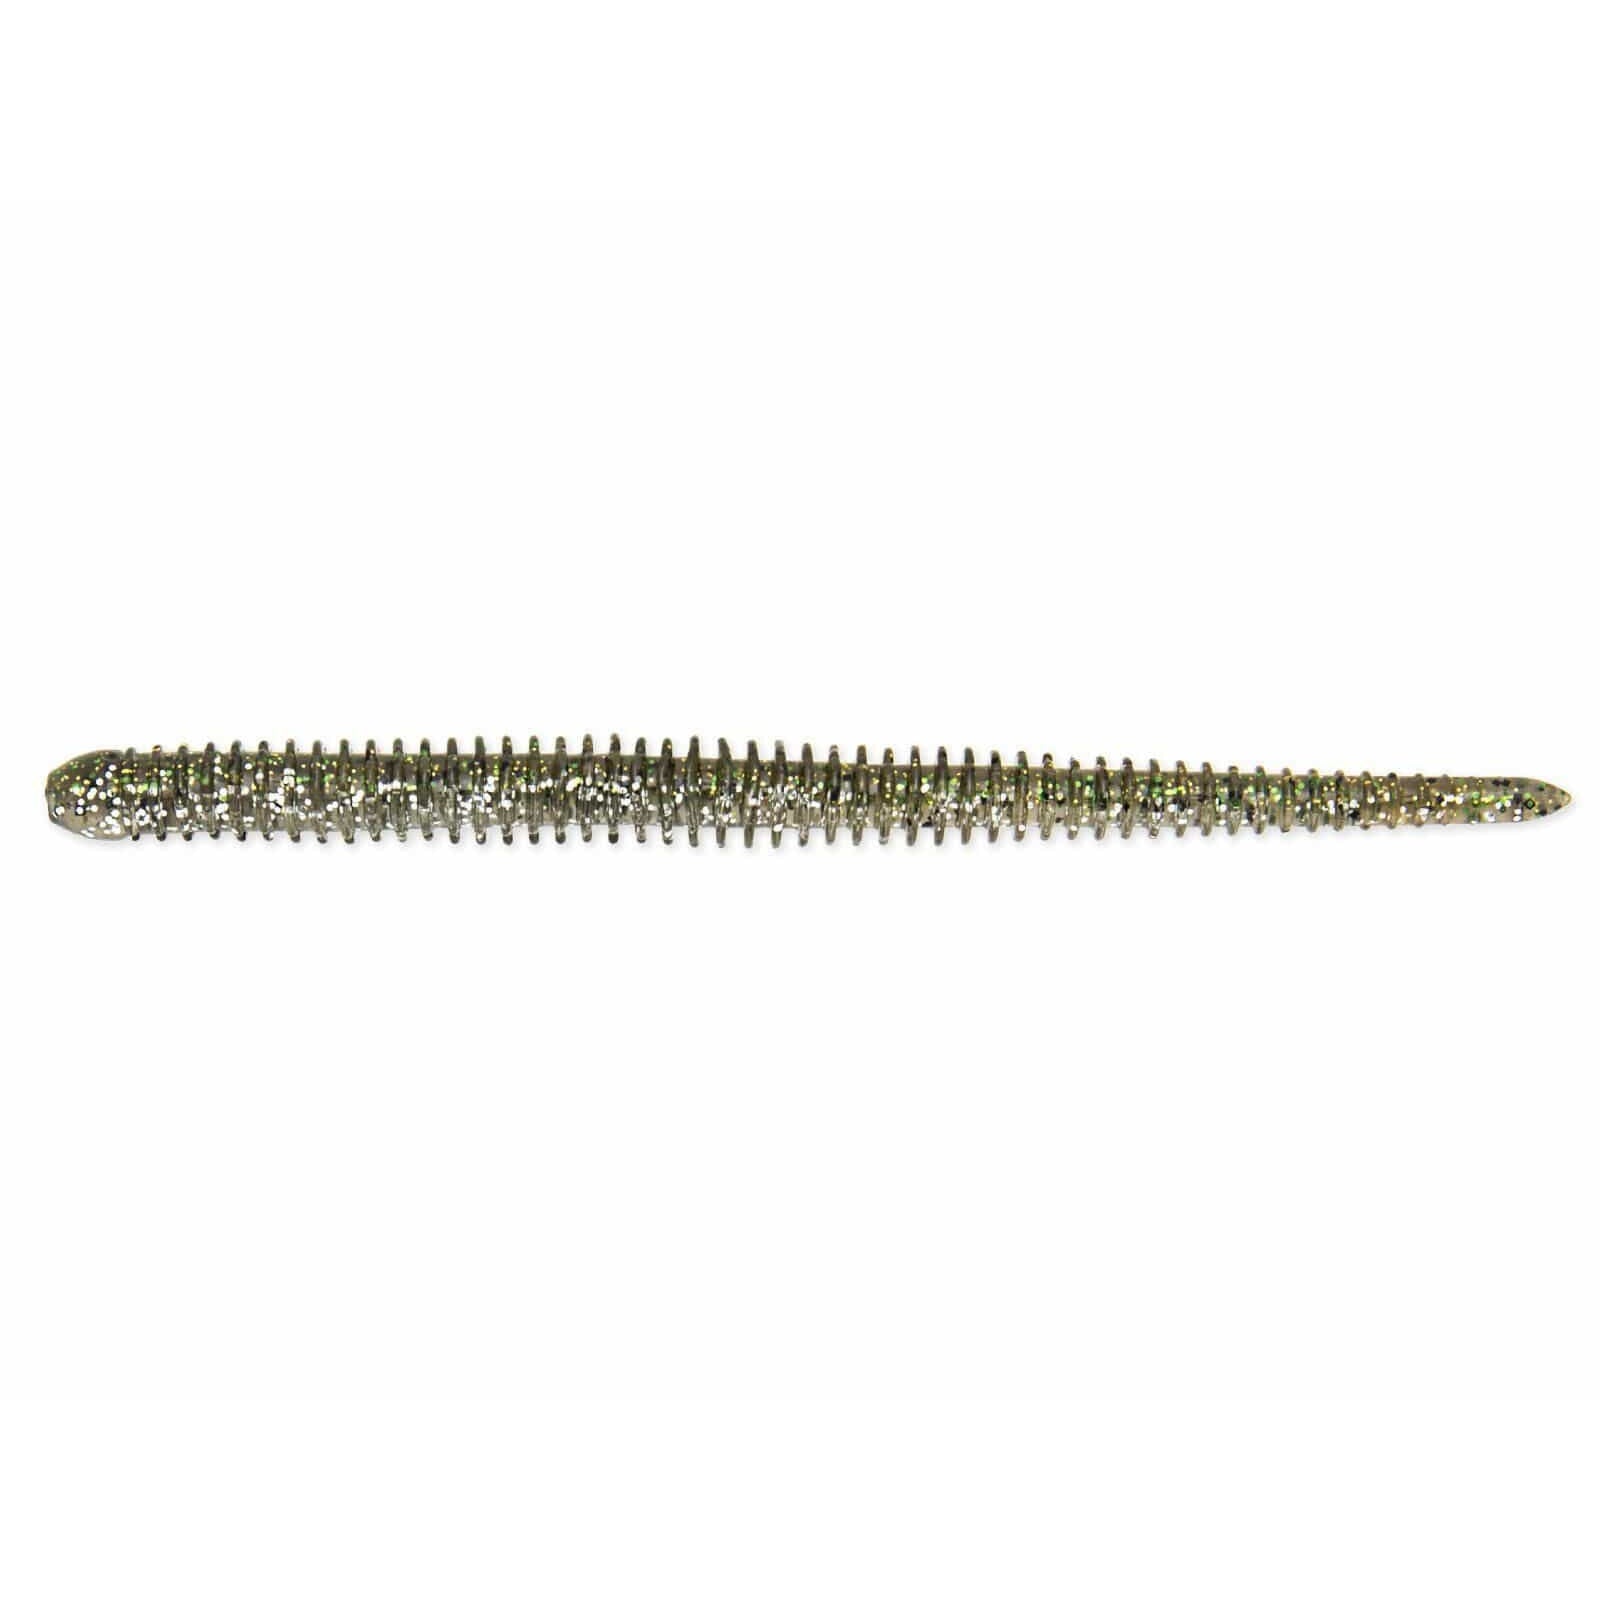 Keitech Scented Soft Bait Worm Lure Easy Shaker 3,5 - MatchFishing